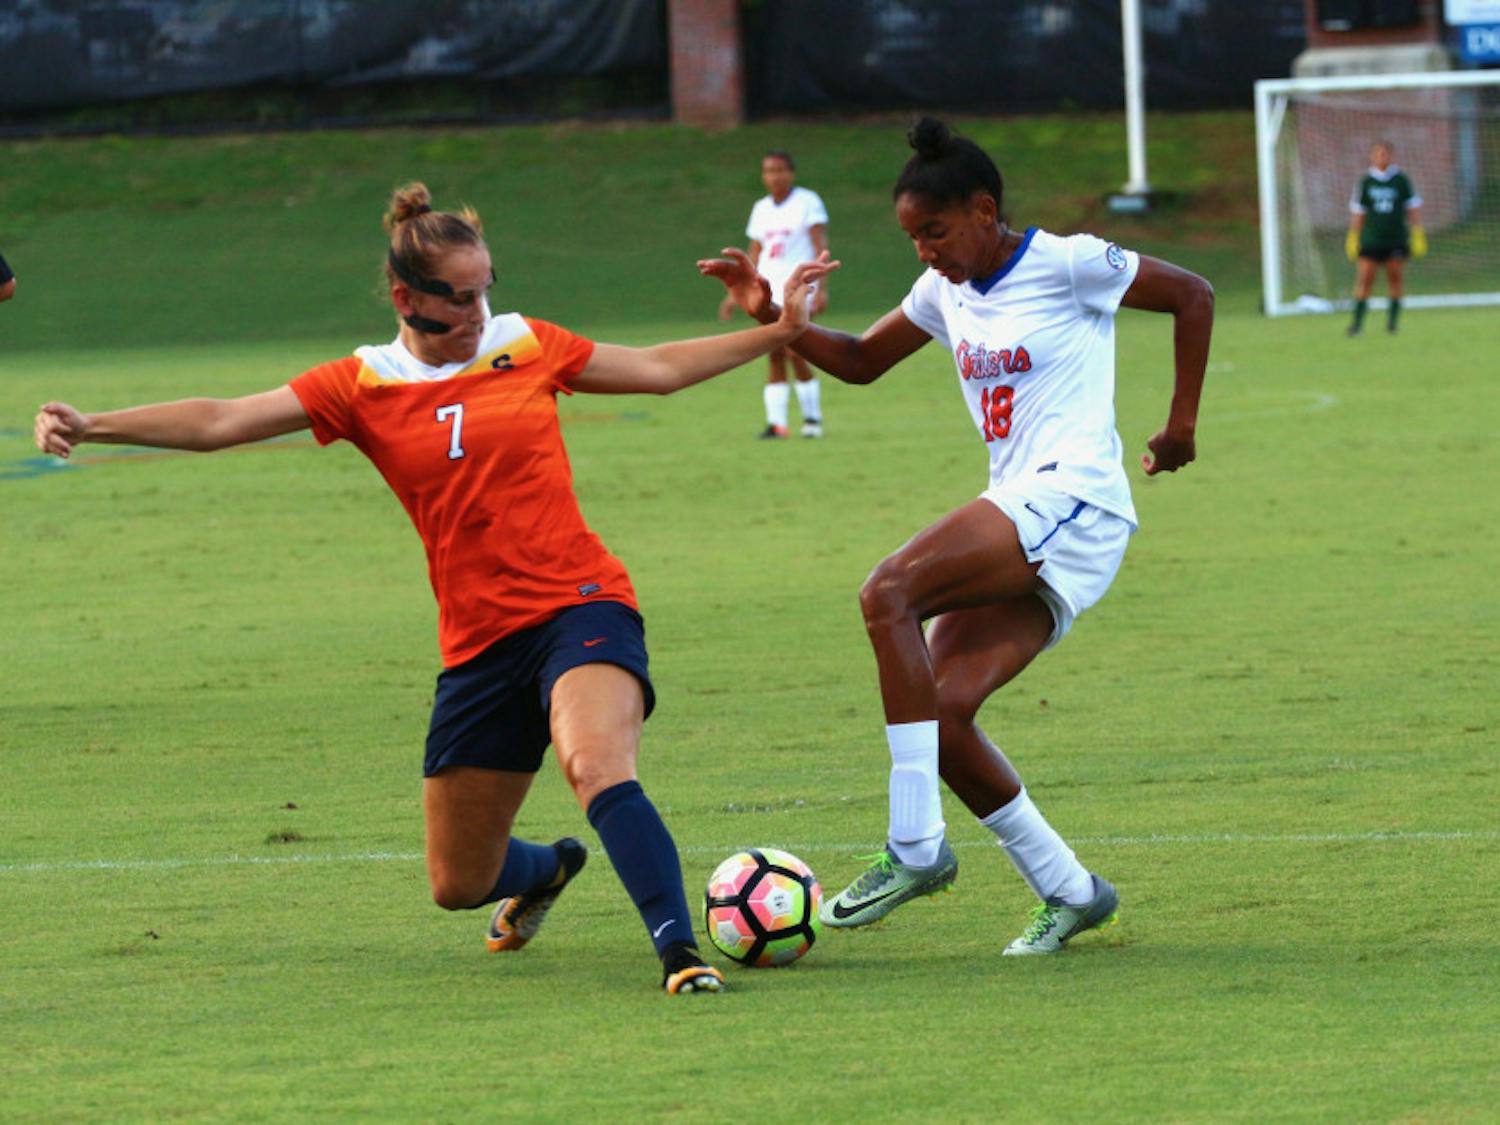 Midfielder Lais Araujo (18) picked up a hat trick in the first 32 minutes of Florida’s 6-0 win over Kentucky on Thursday night in Lexington.